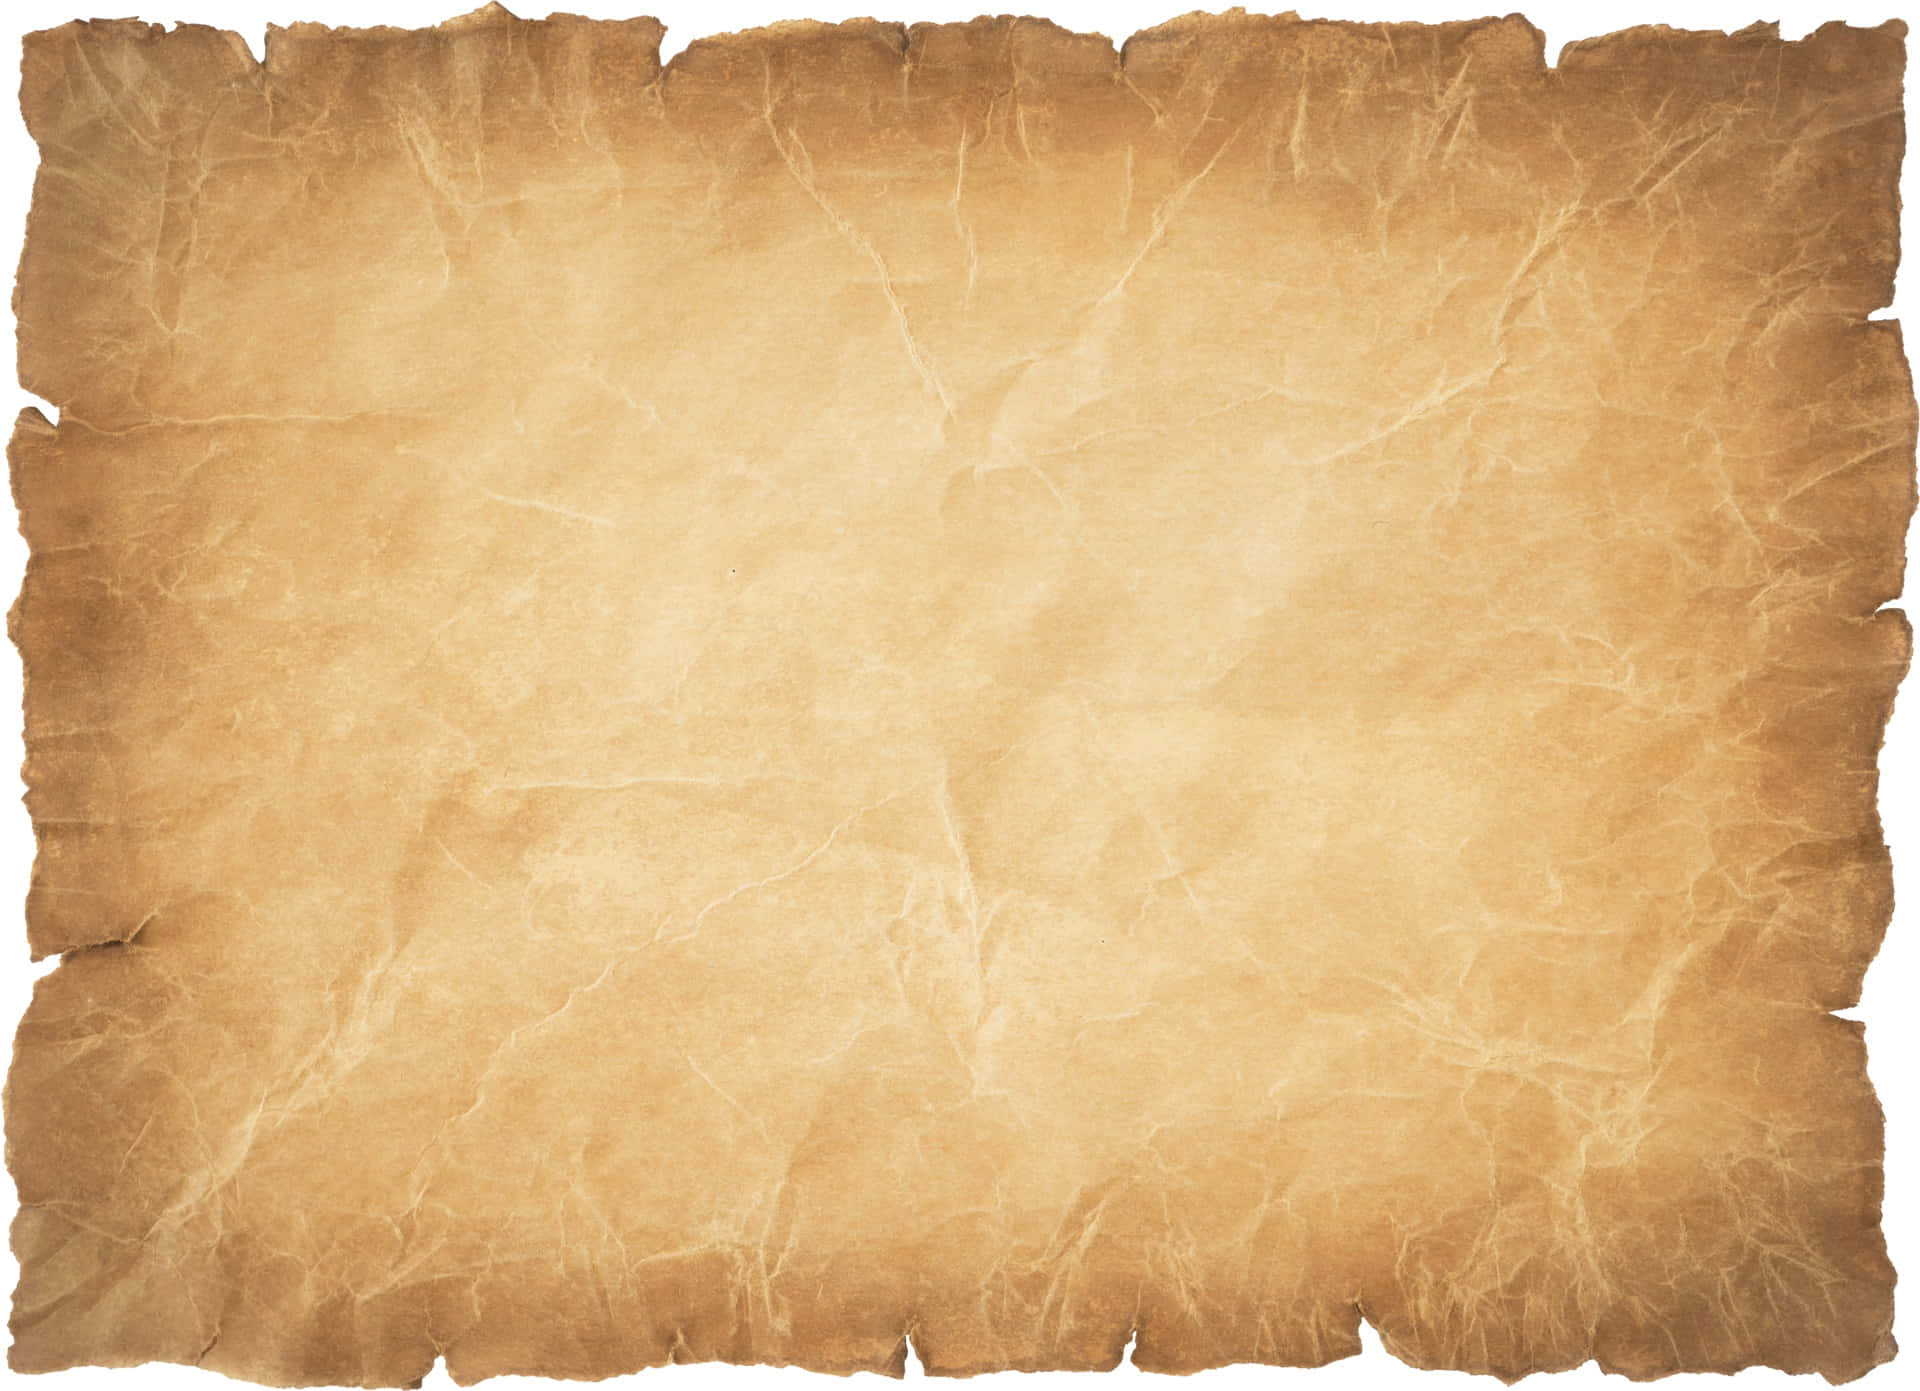 Parchment paper background Old paper with scorched edges parchment  AD  background paper  Old paper background Vintage paper background  Paper background